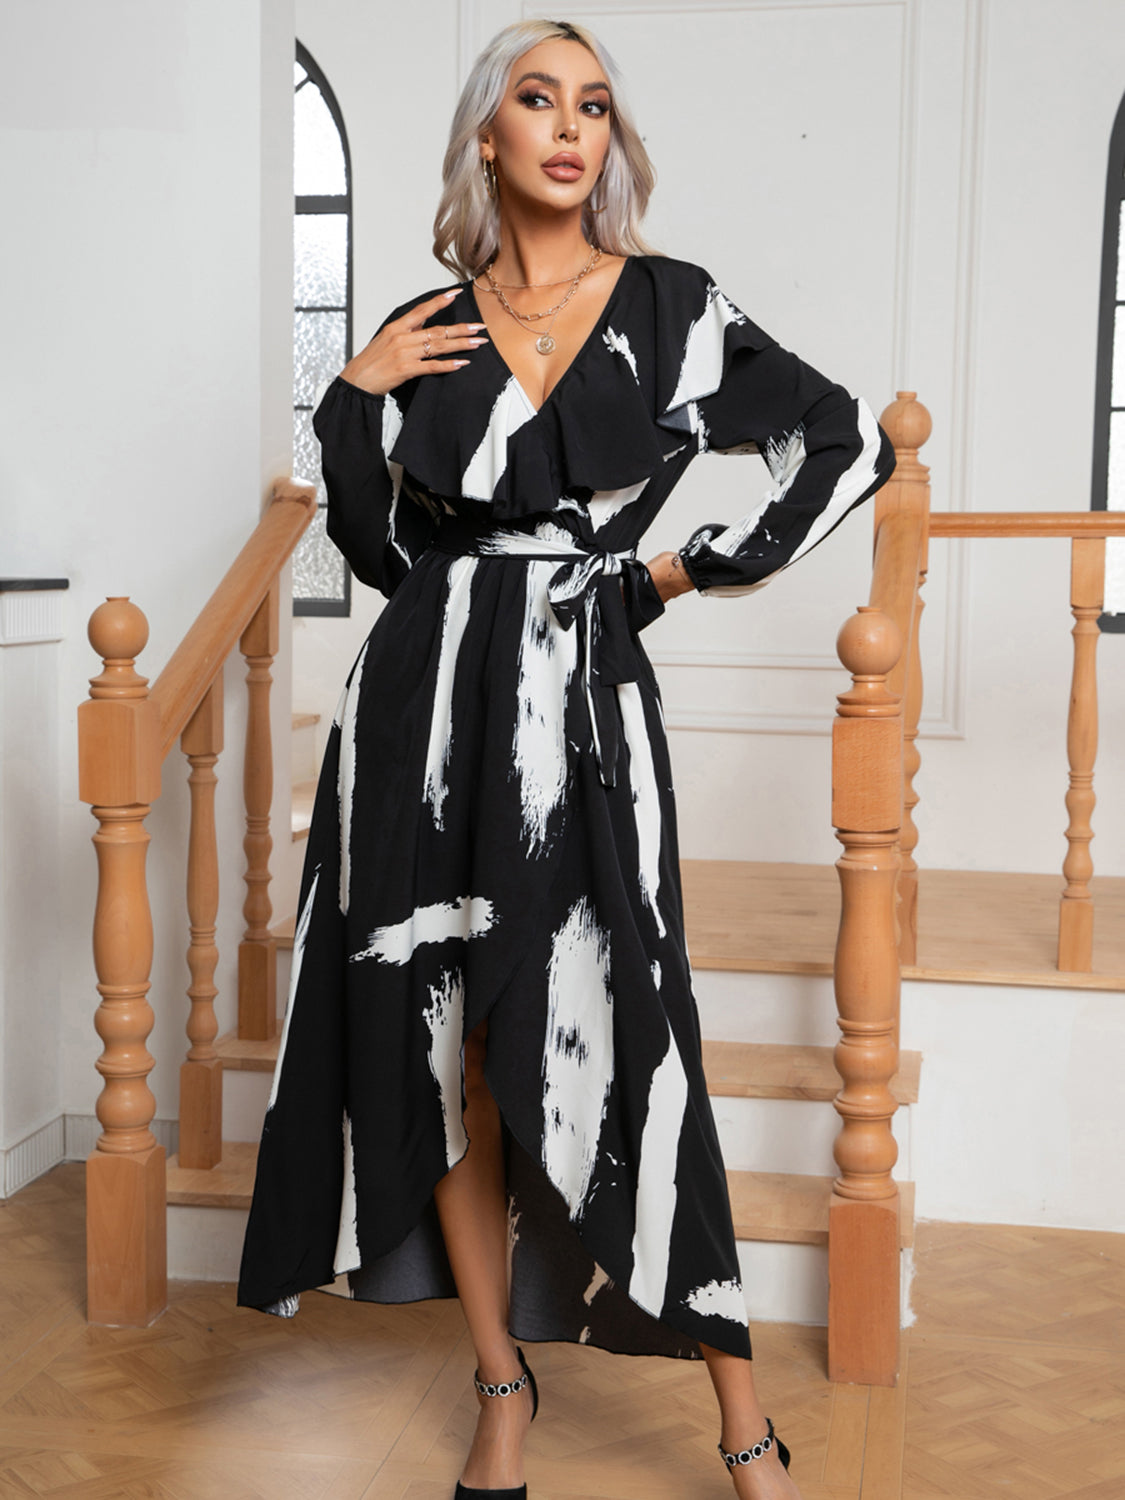 Summer Beach Wedding Guest Dress for Women Over 50, Printed Tie Front Ruffle Trim Long Sleeve Party Dress